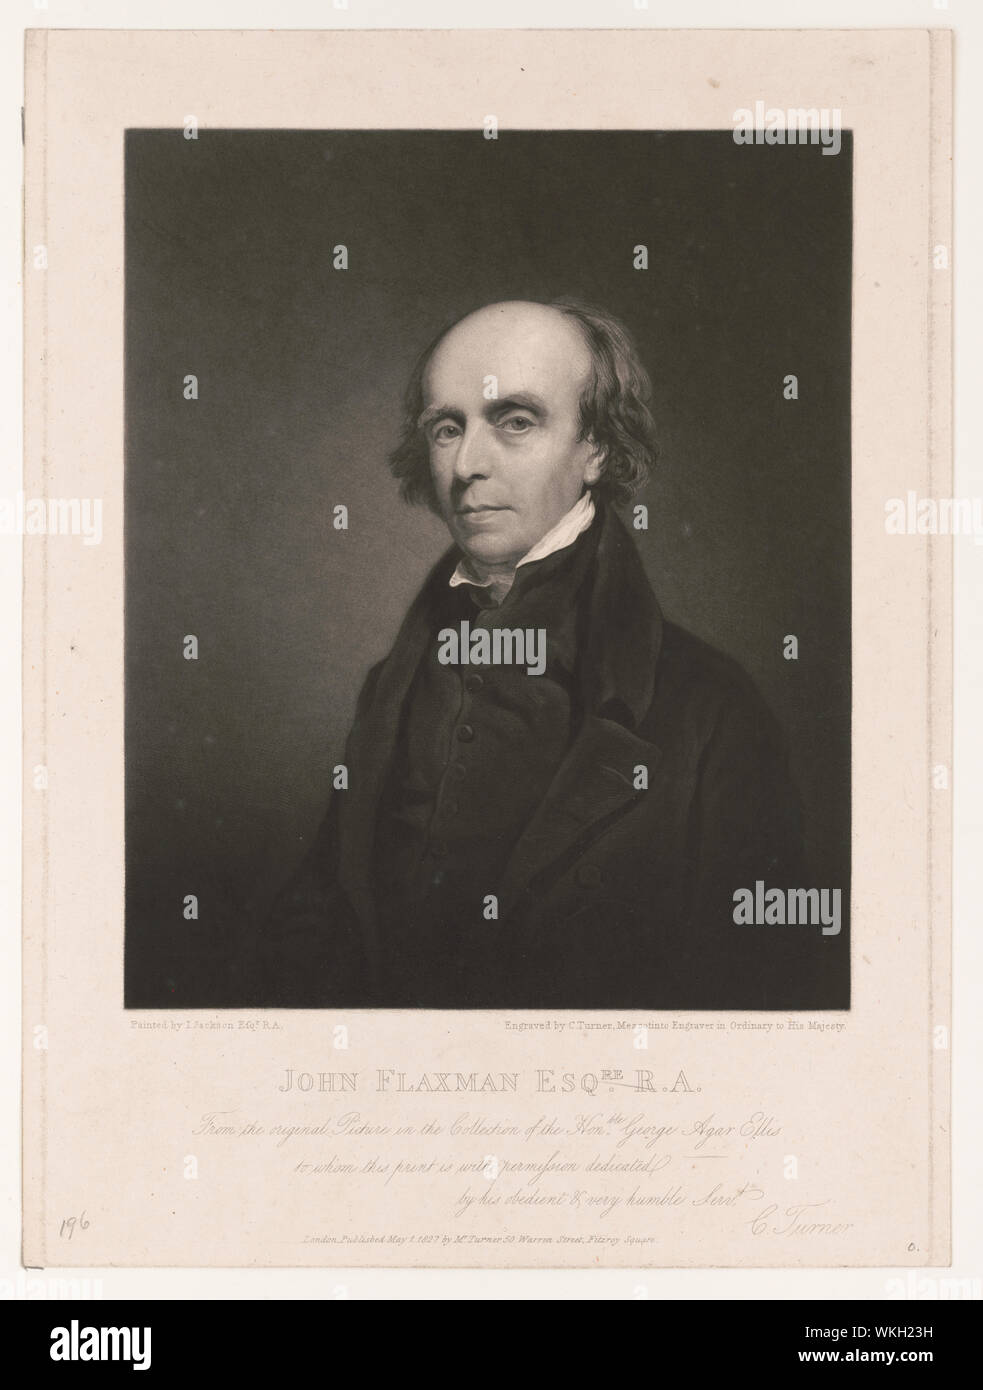 John Flaxman Esqre. R.A. / painted by I. Jackson Esqr. R.A. ; engraved by C. Turner, mezzotinto engraver in ordinary to His Majesty. Stock Photo